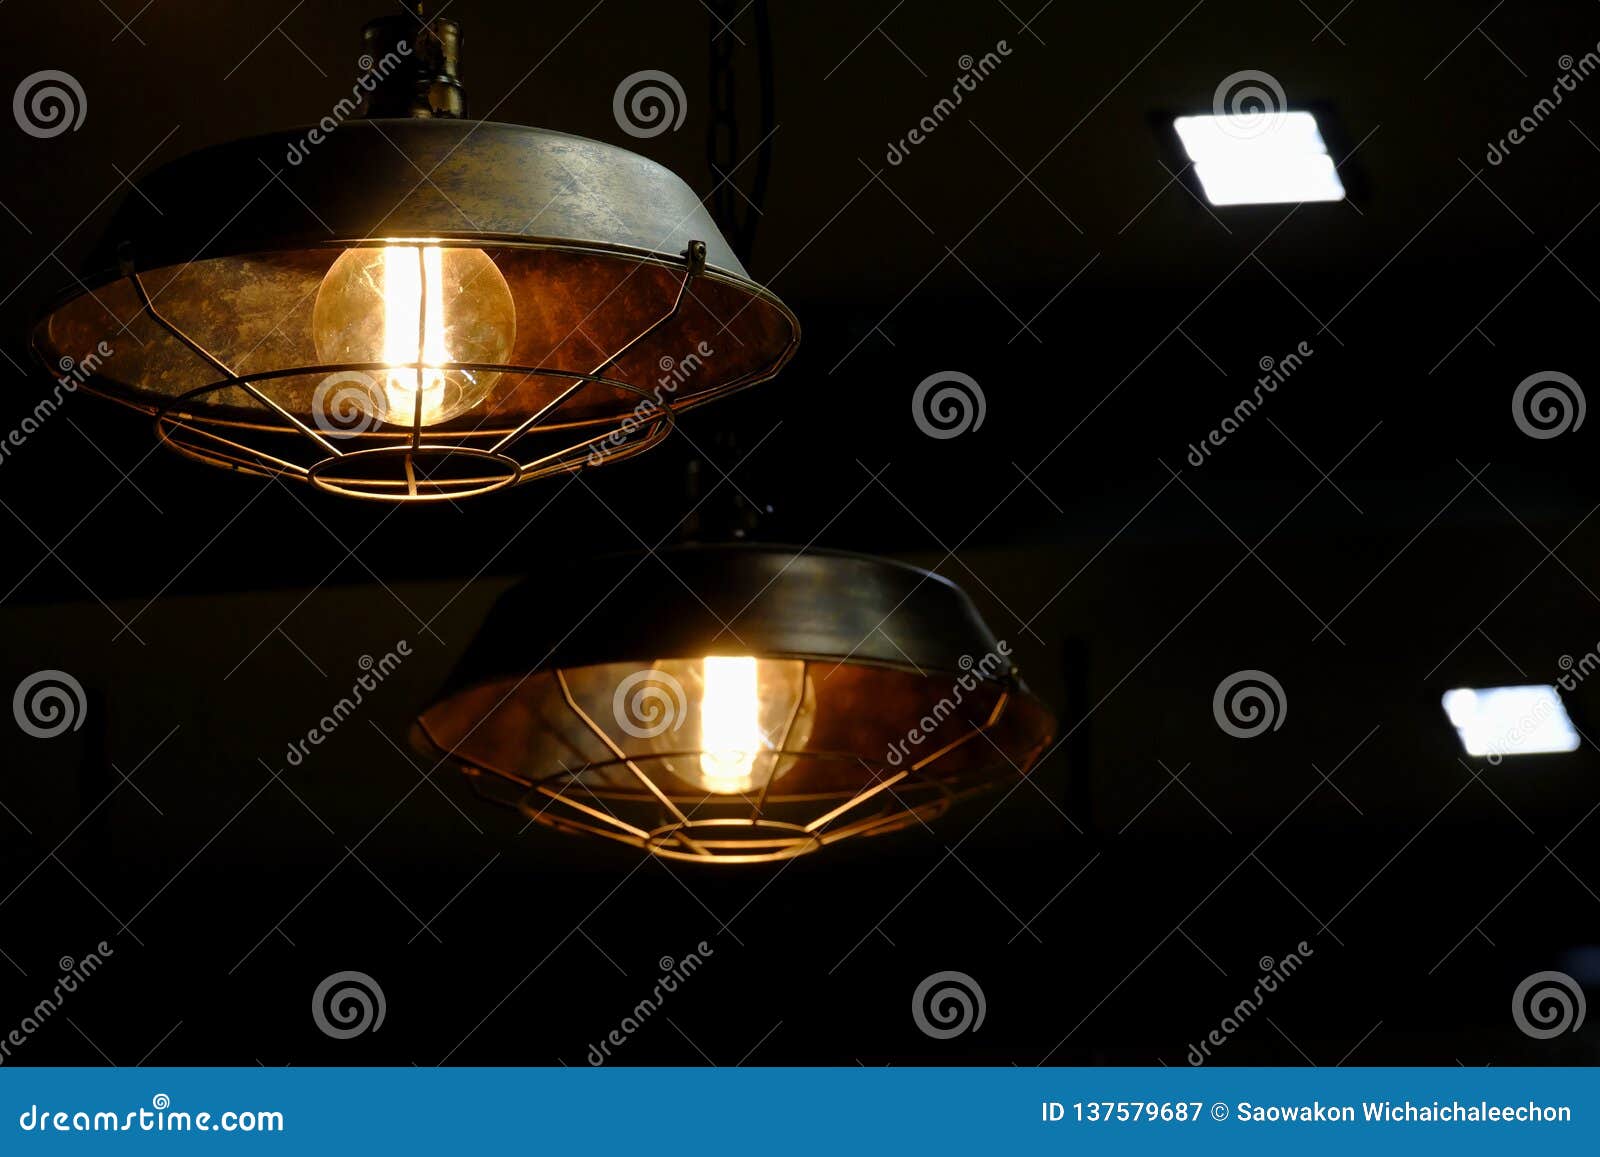 A Modern Light Lamp Hanging From The Room Ceiling With Dark